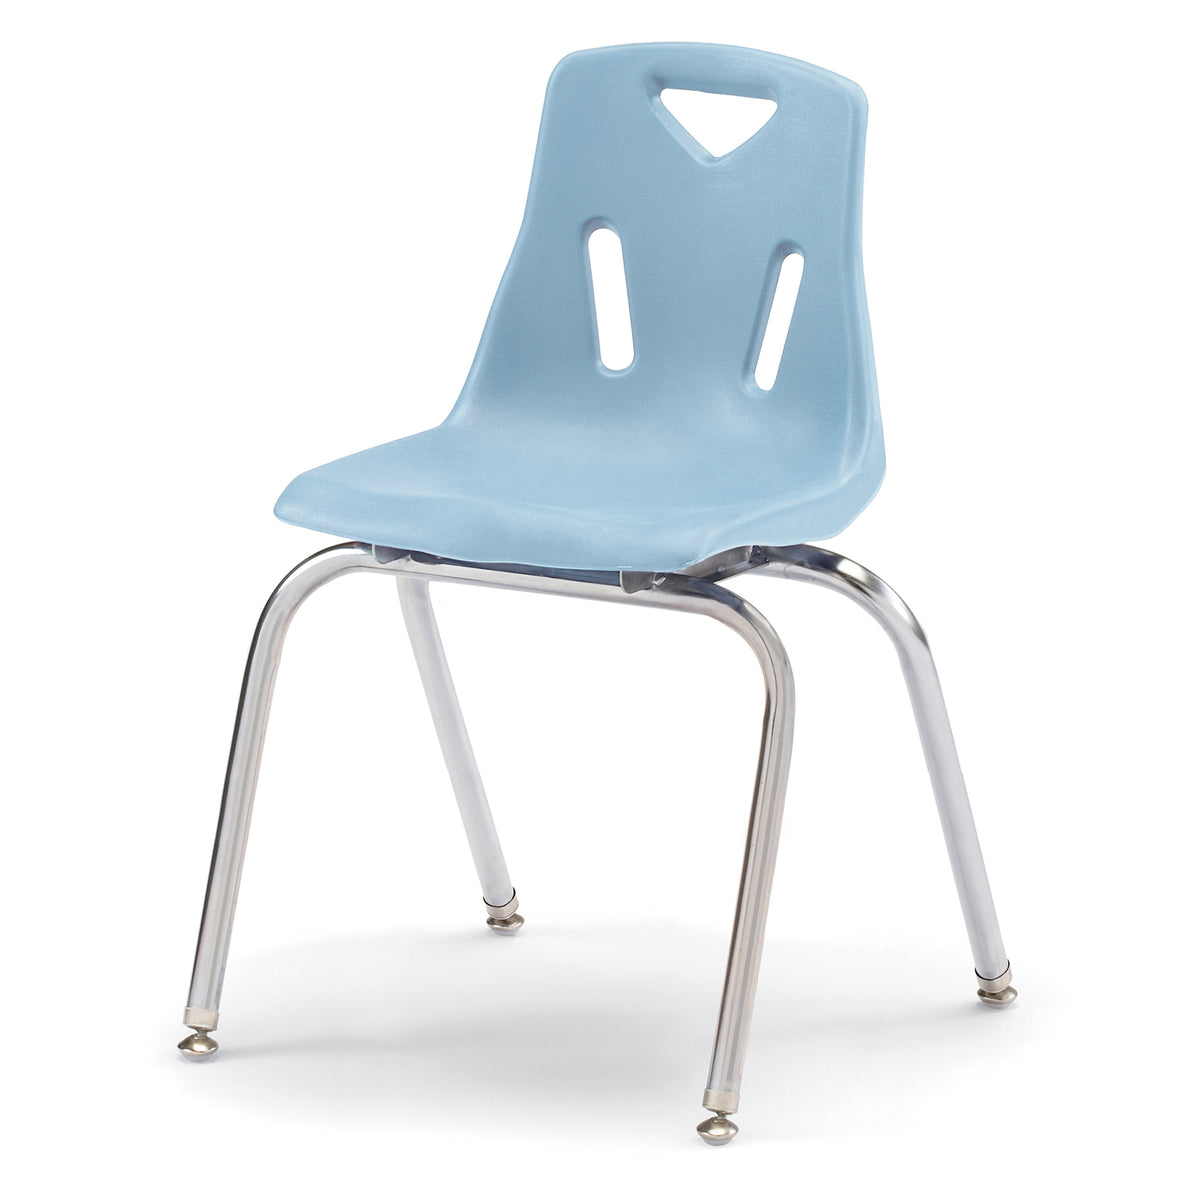 8148JC6131, Berries Stacking Chair with Chrome-Plated Legs - 18" Ht - Set of 6 - Coastal Blue